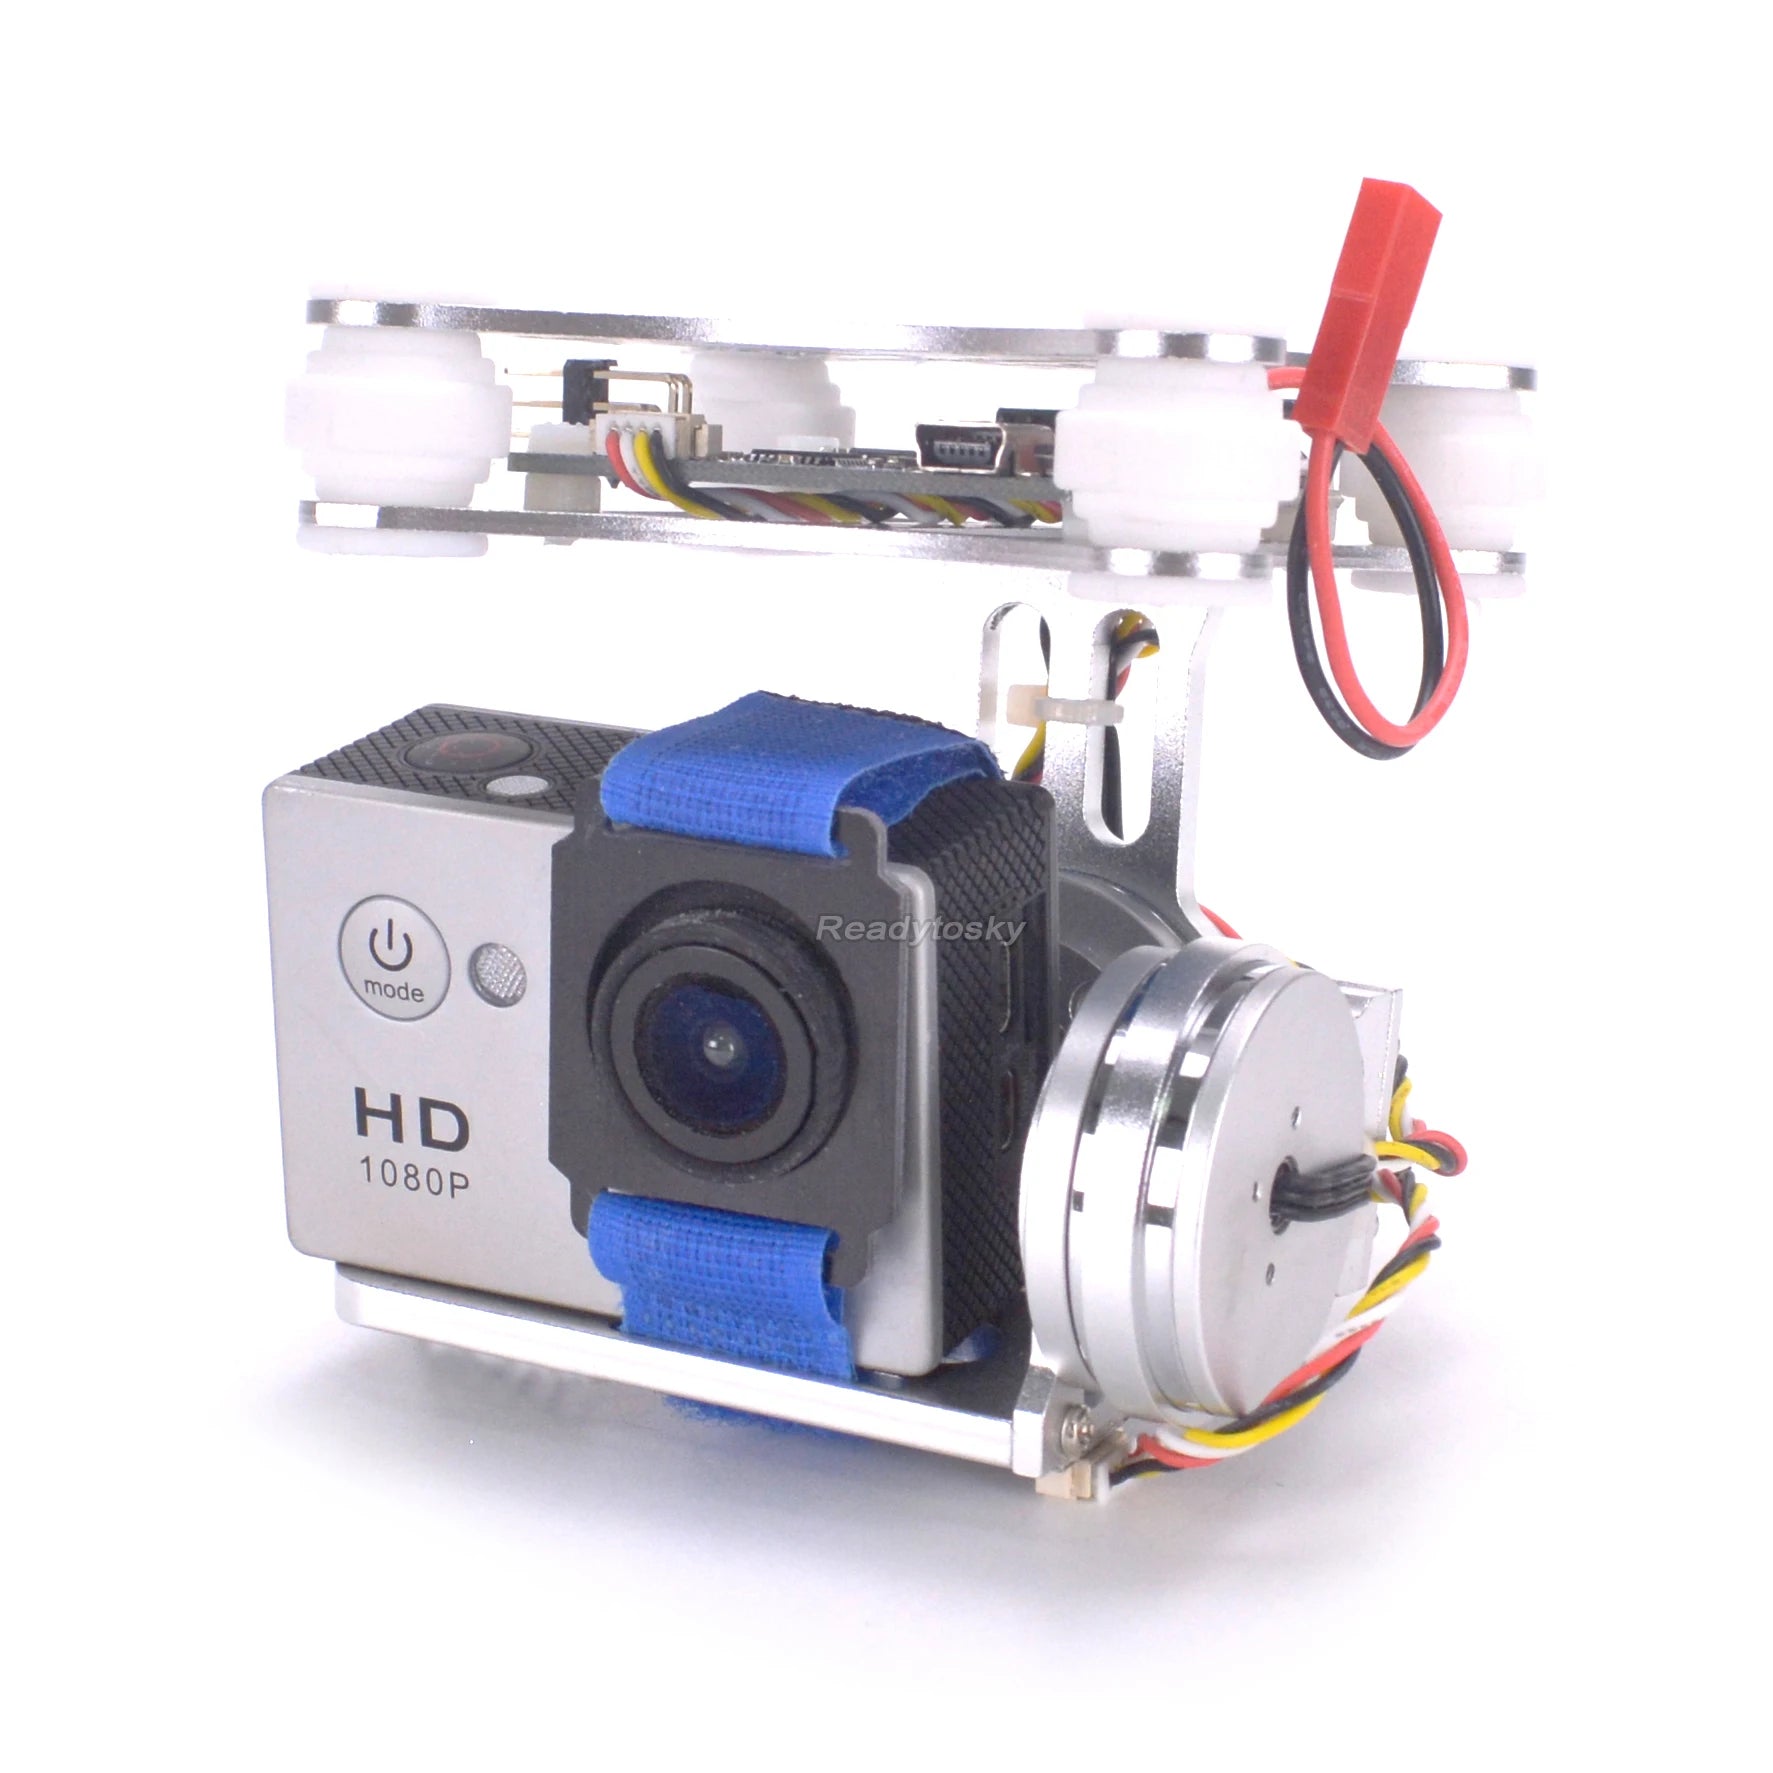 the gimbal has requirement to the weight, if equipped with a light camera